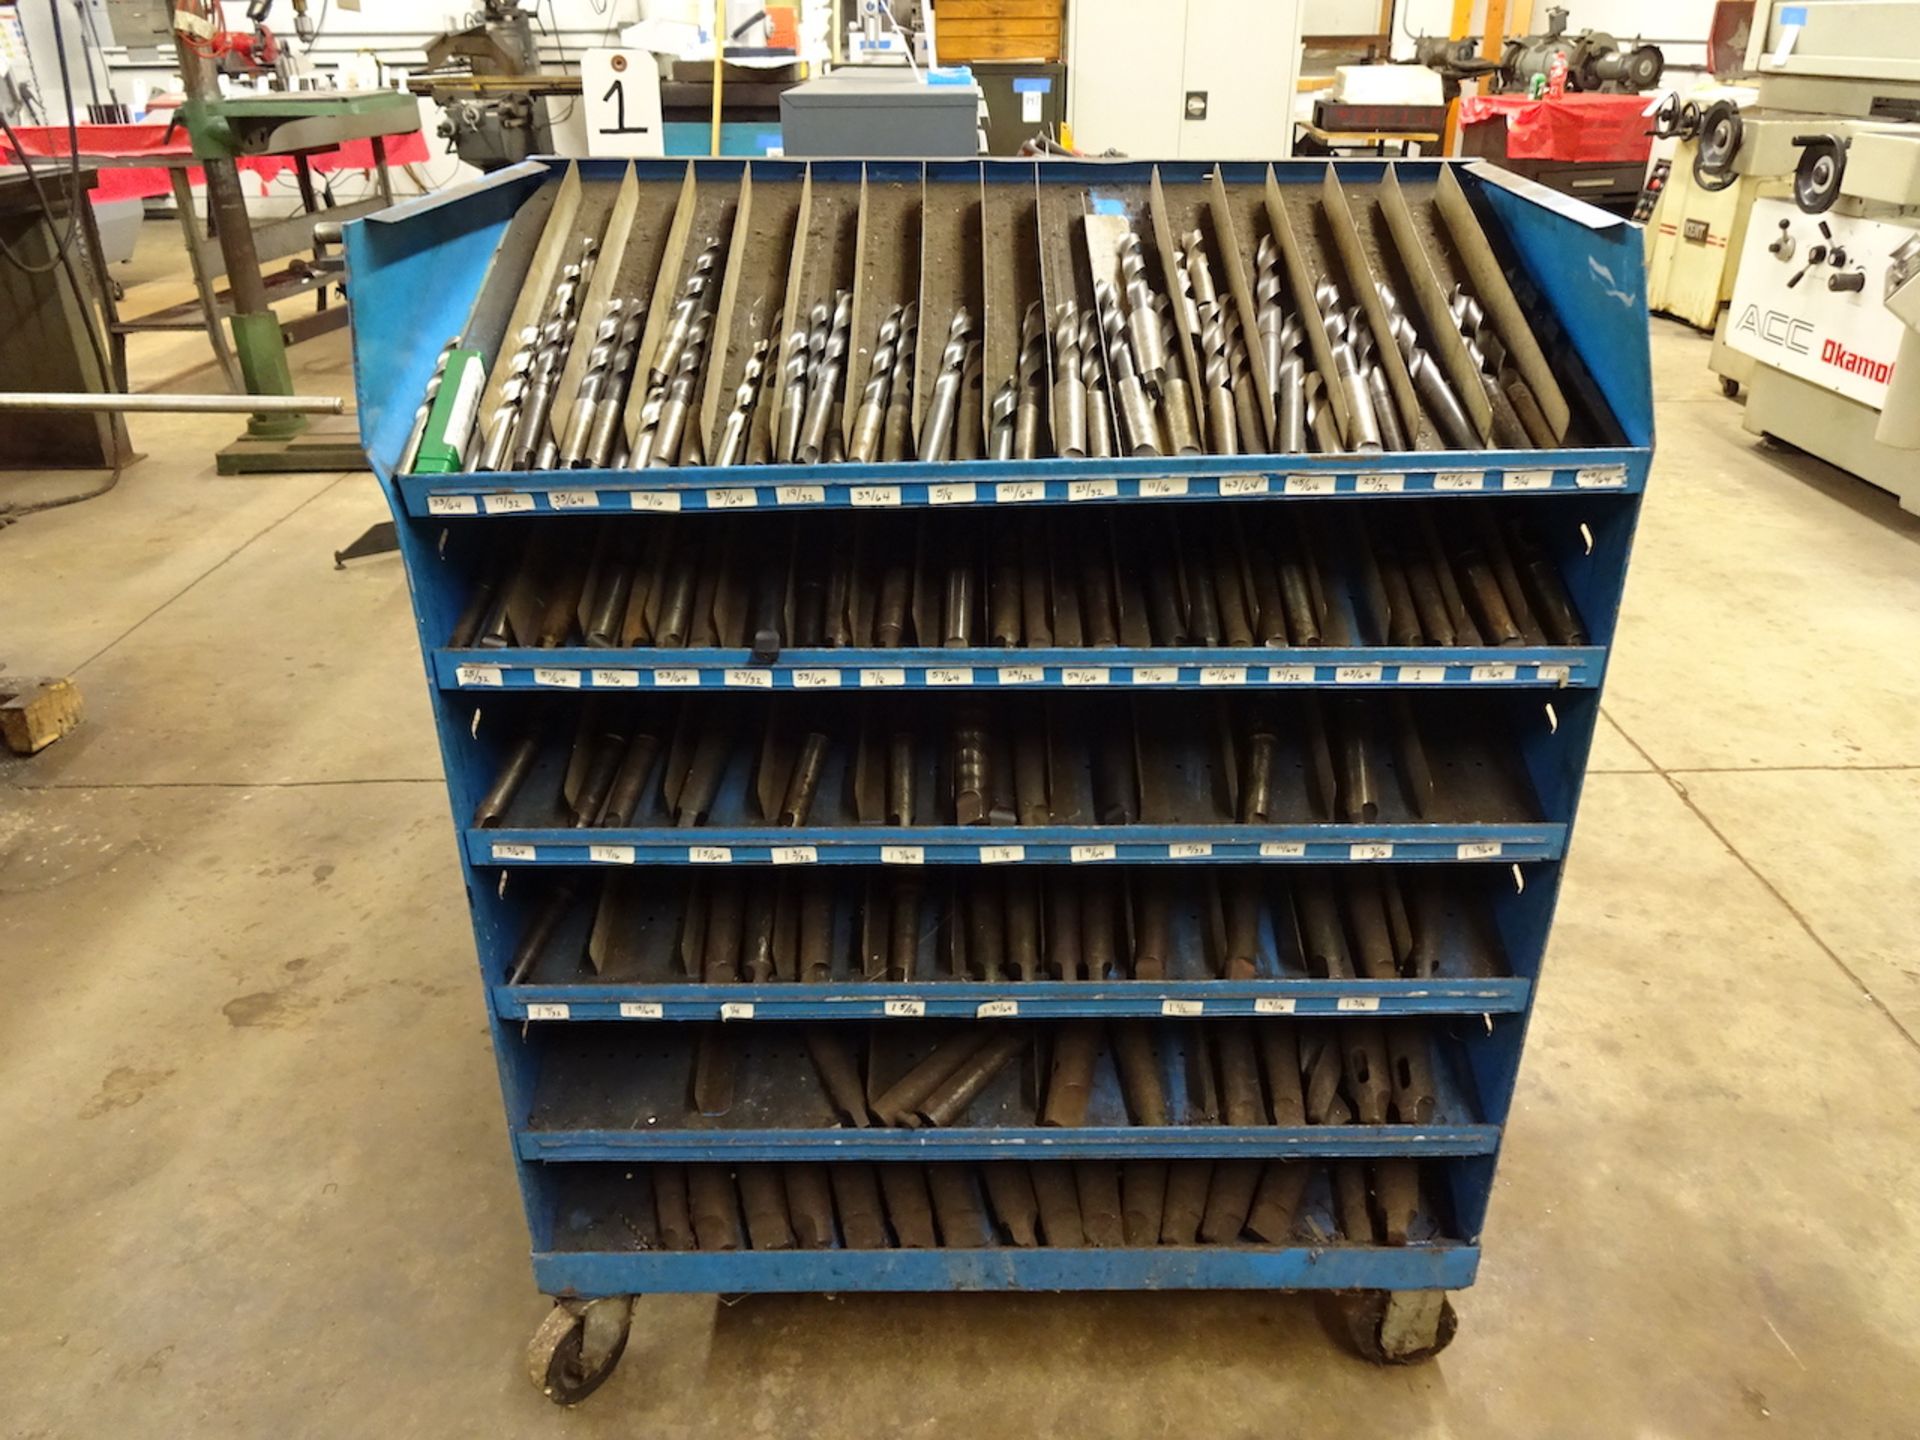 LOT ASSORTED DRILLS IN PORTABLE STORAGE RACK